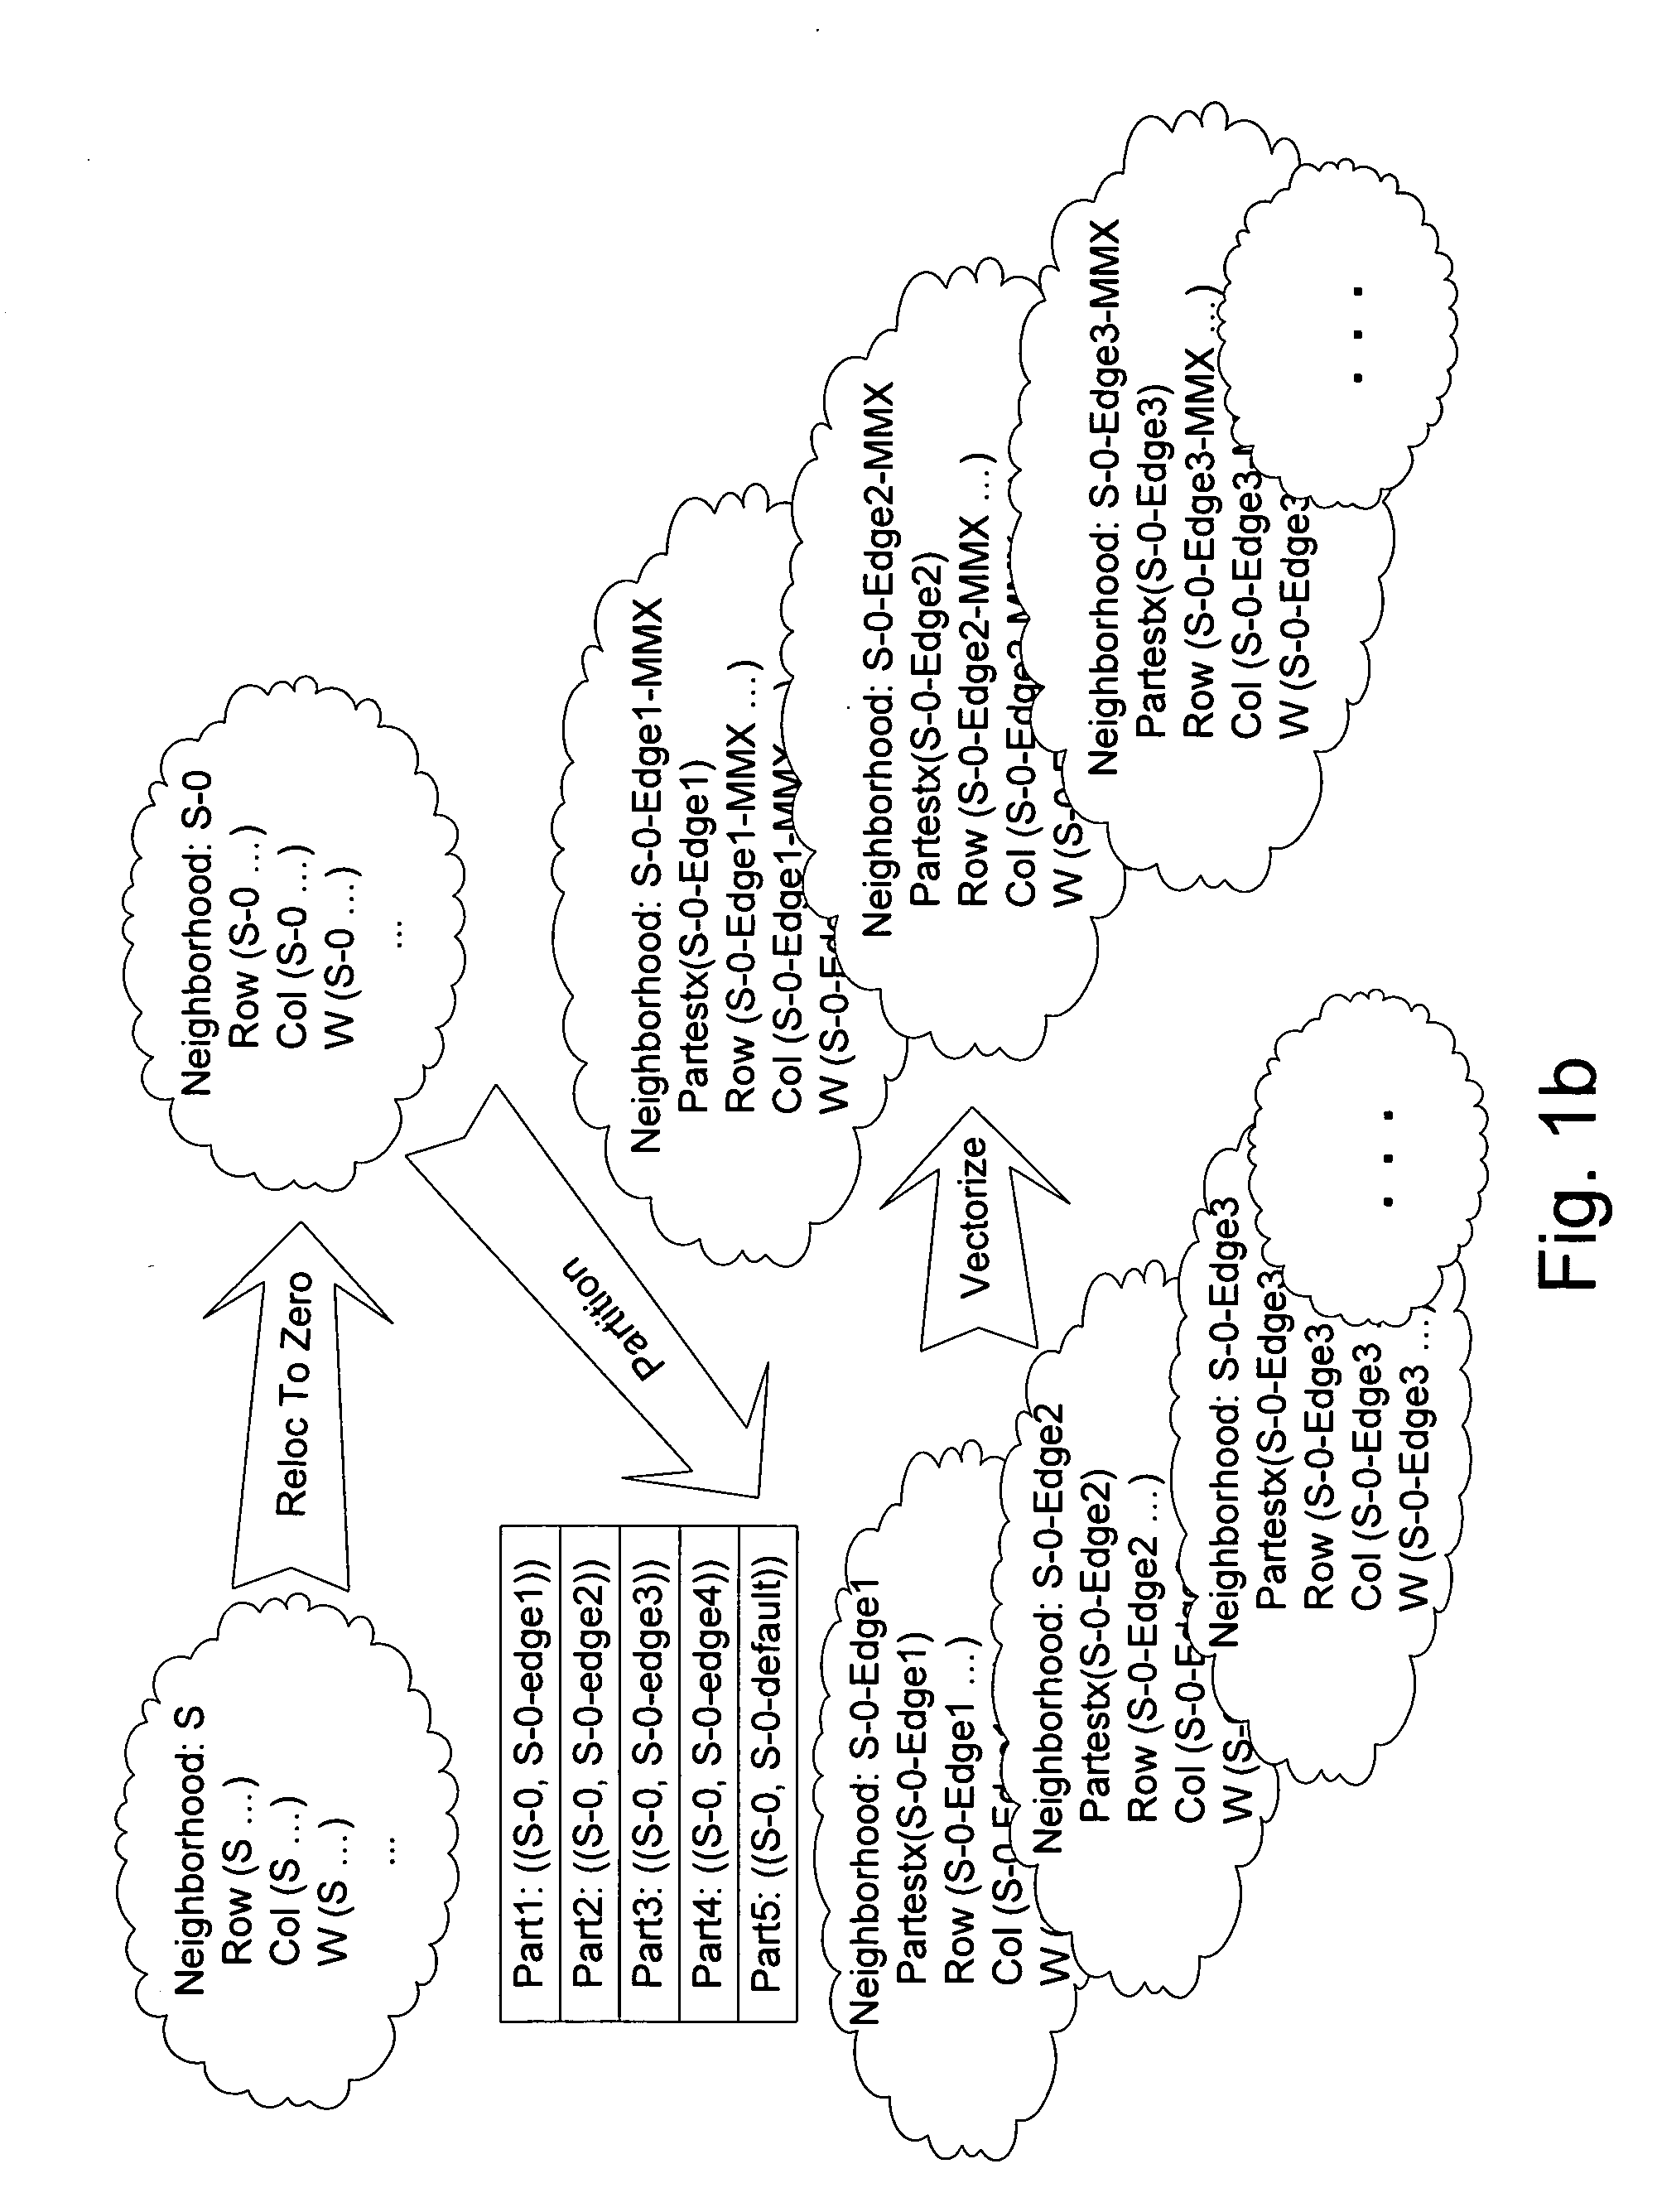 Automated Partitioning of a Computation for Parallel or Other High Capability Architecture